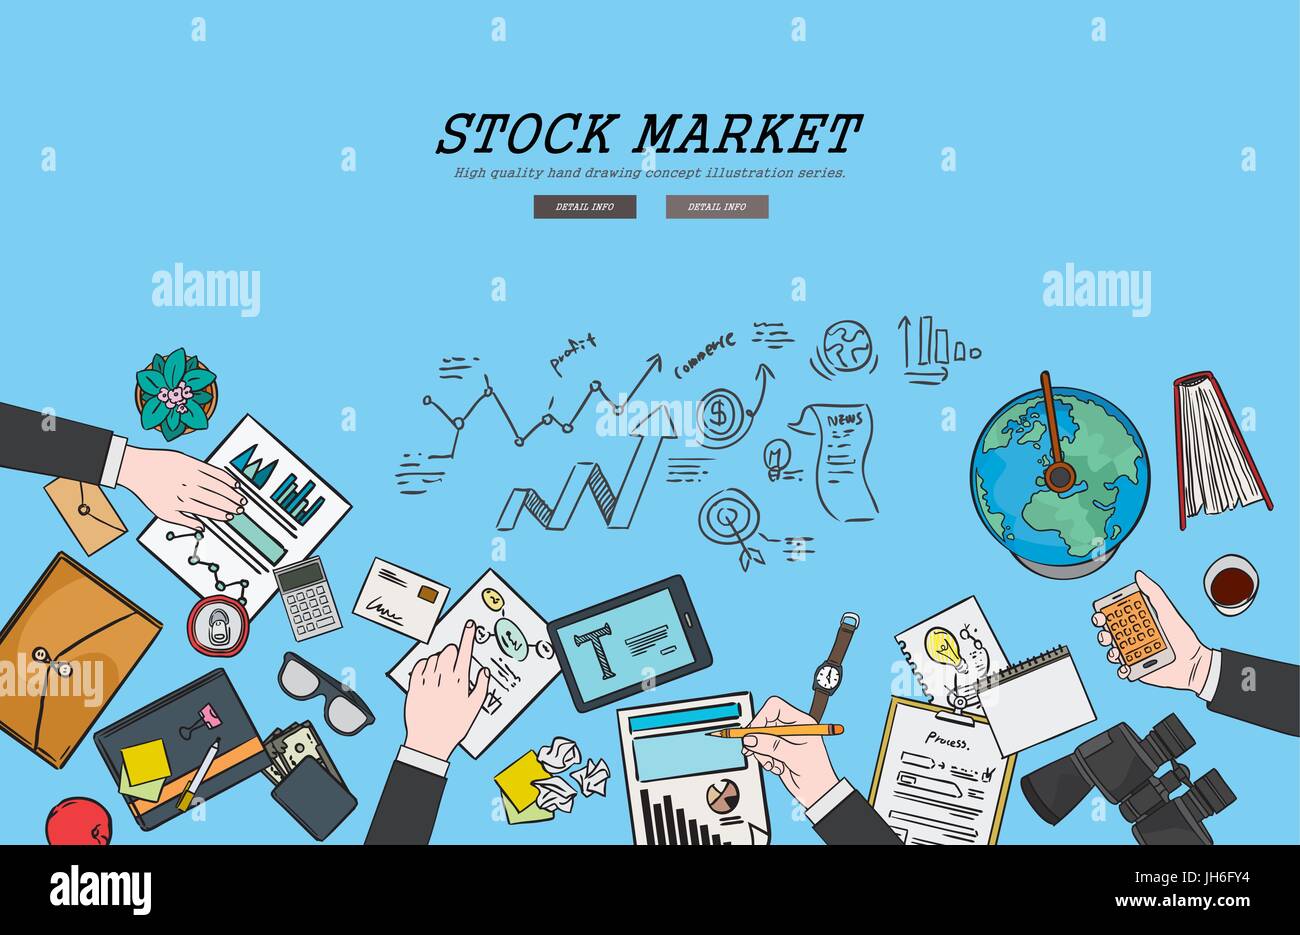 Drawing flat design illustration stock market concept. Concepts for web banners and promotional materials. Stock Vector